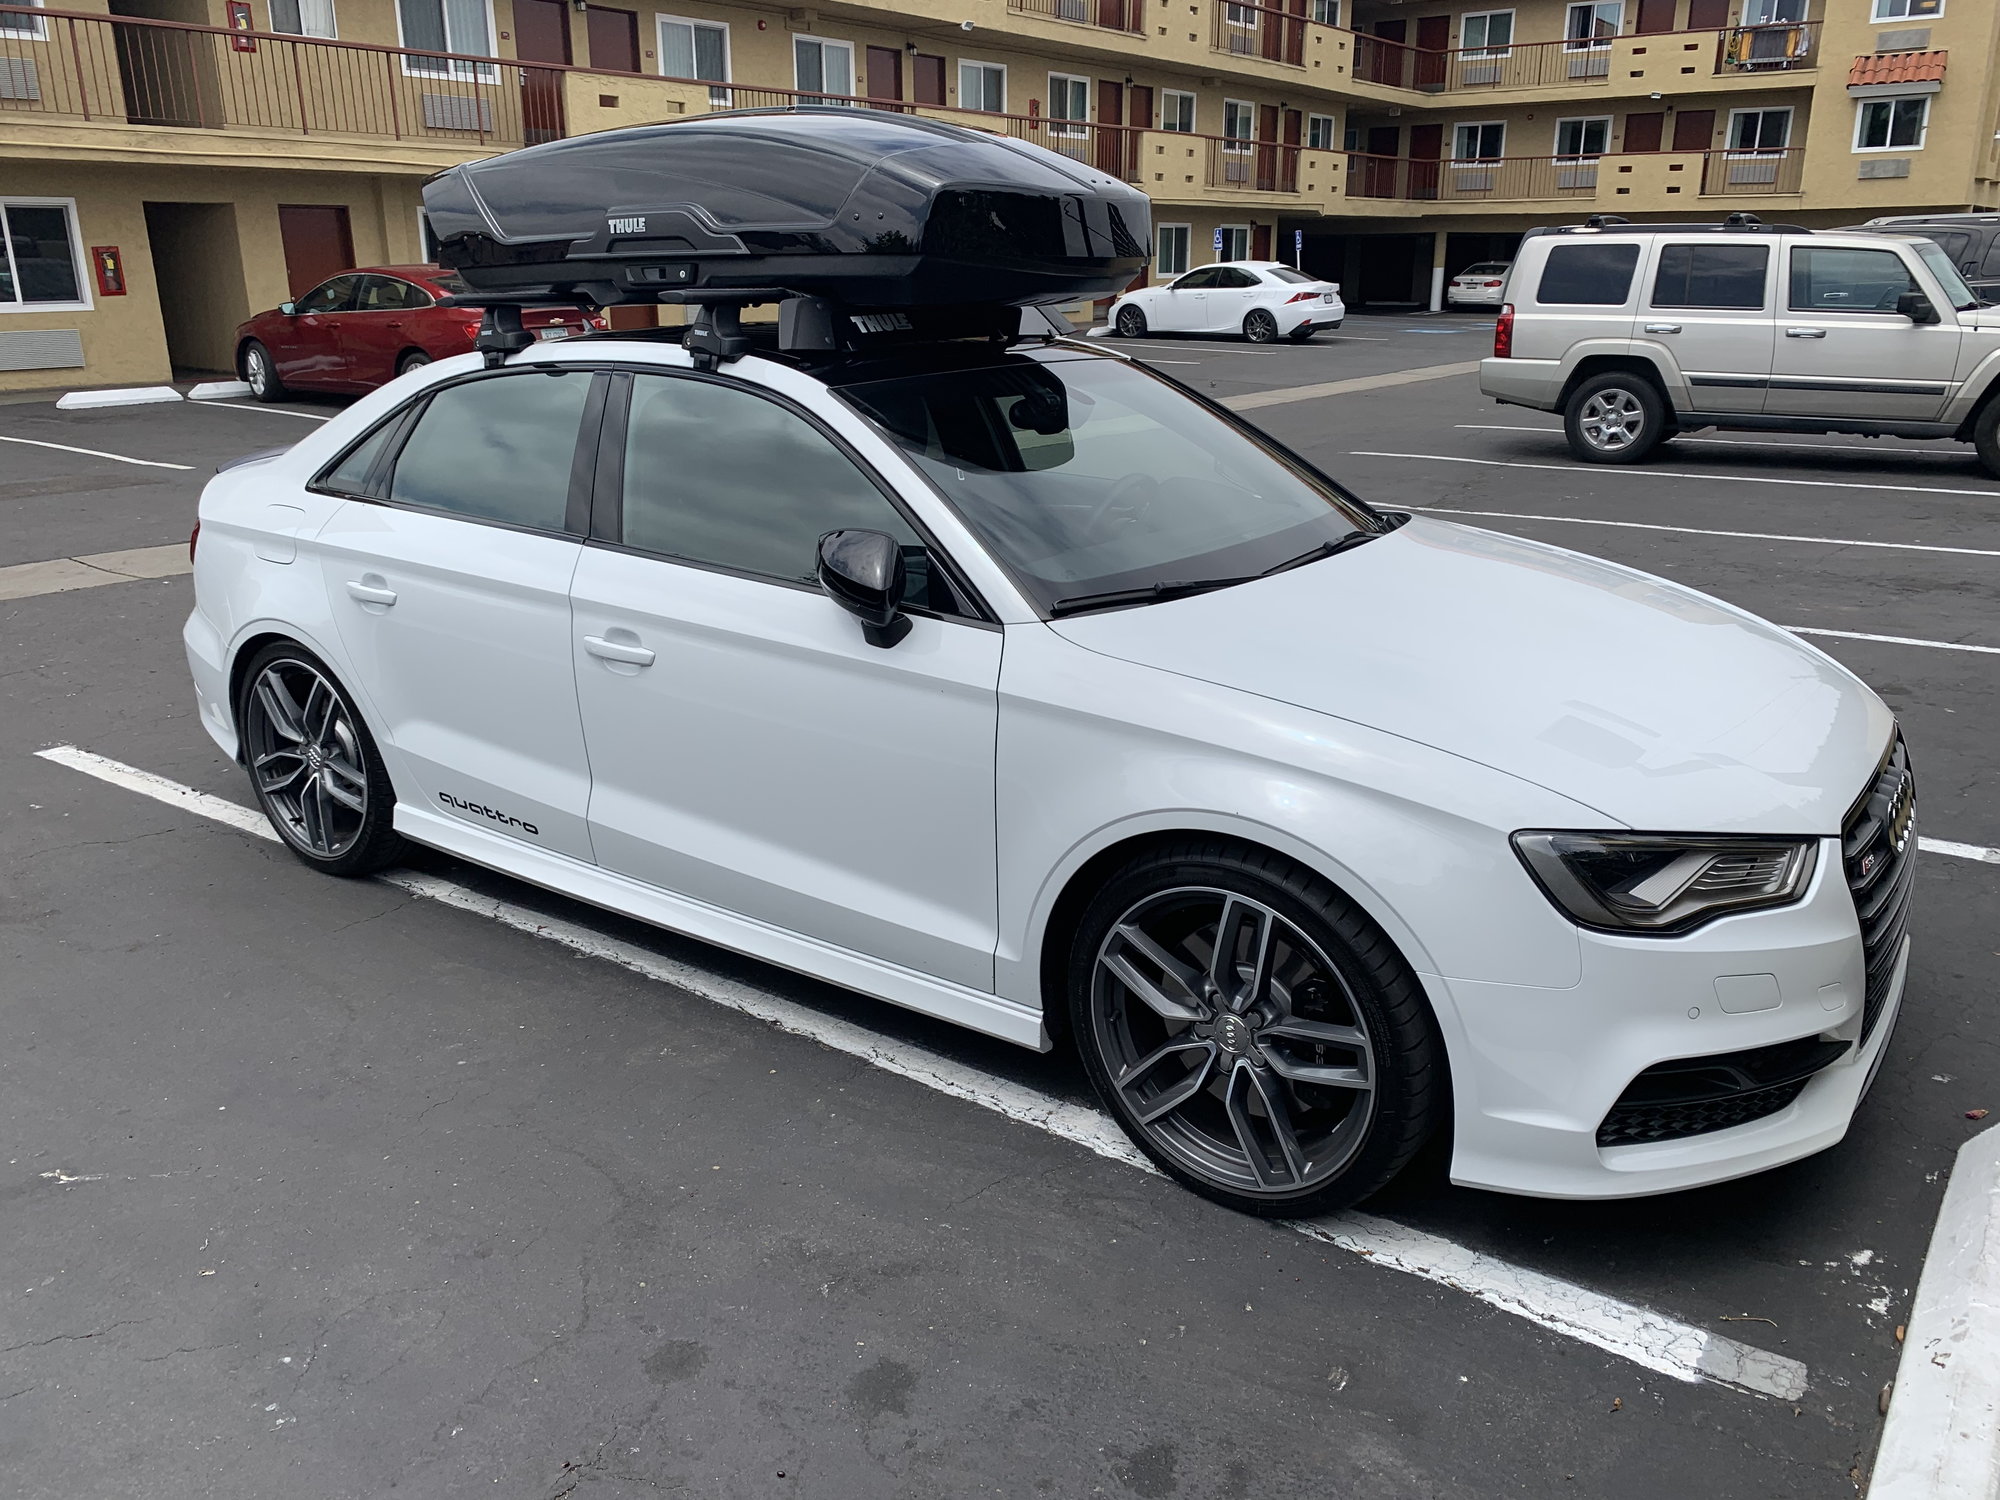 Thule Roof Rack Audi A3 Sportback 12.300 About Roof